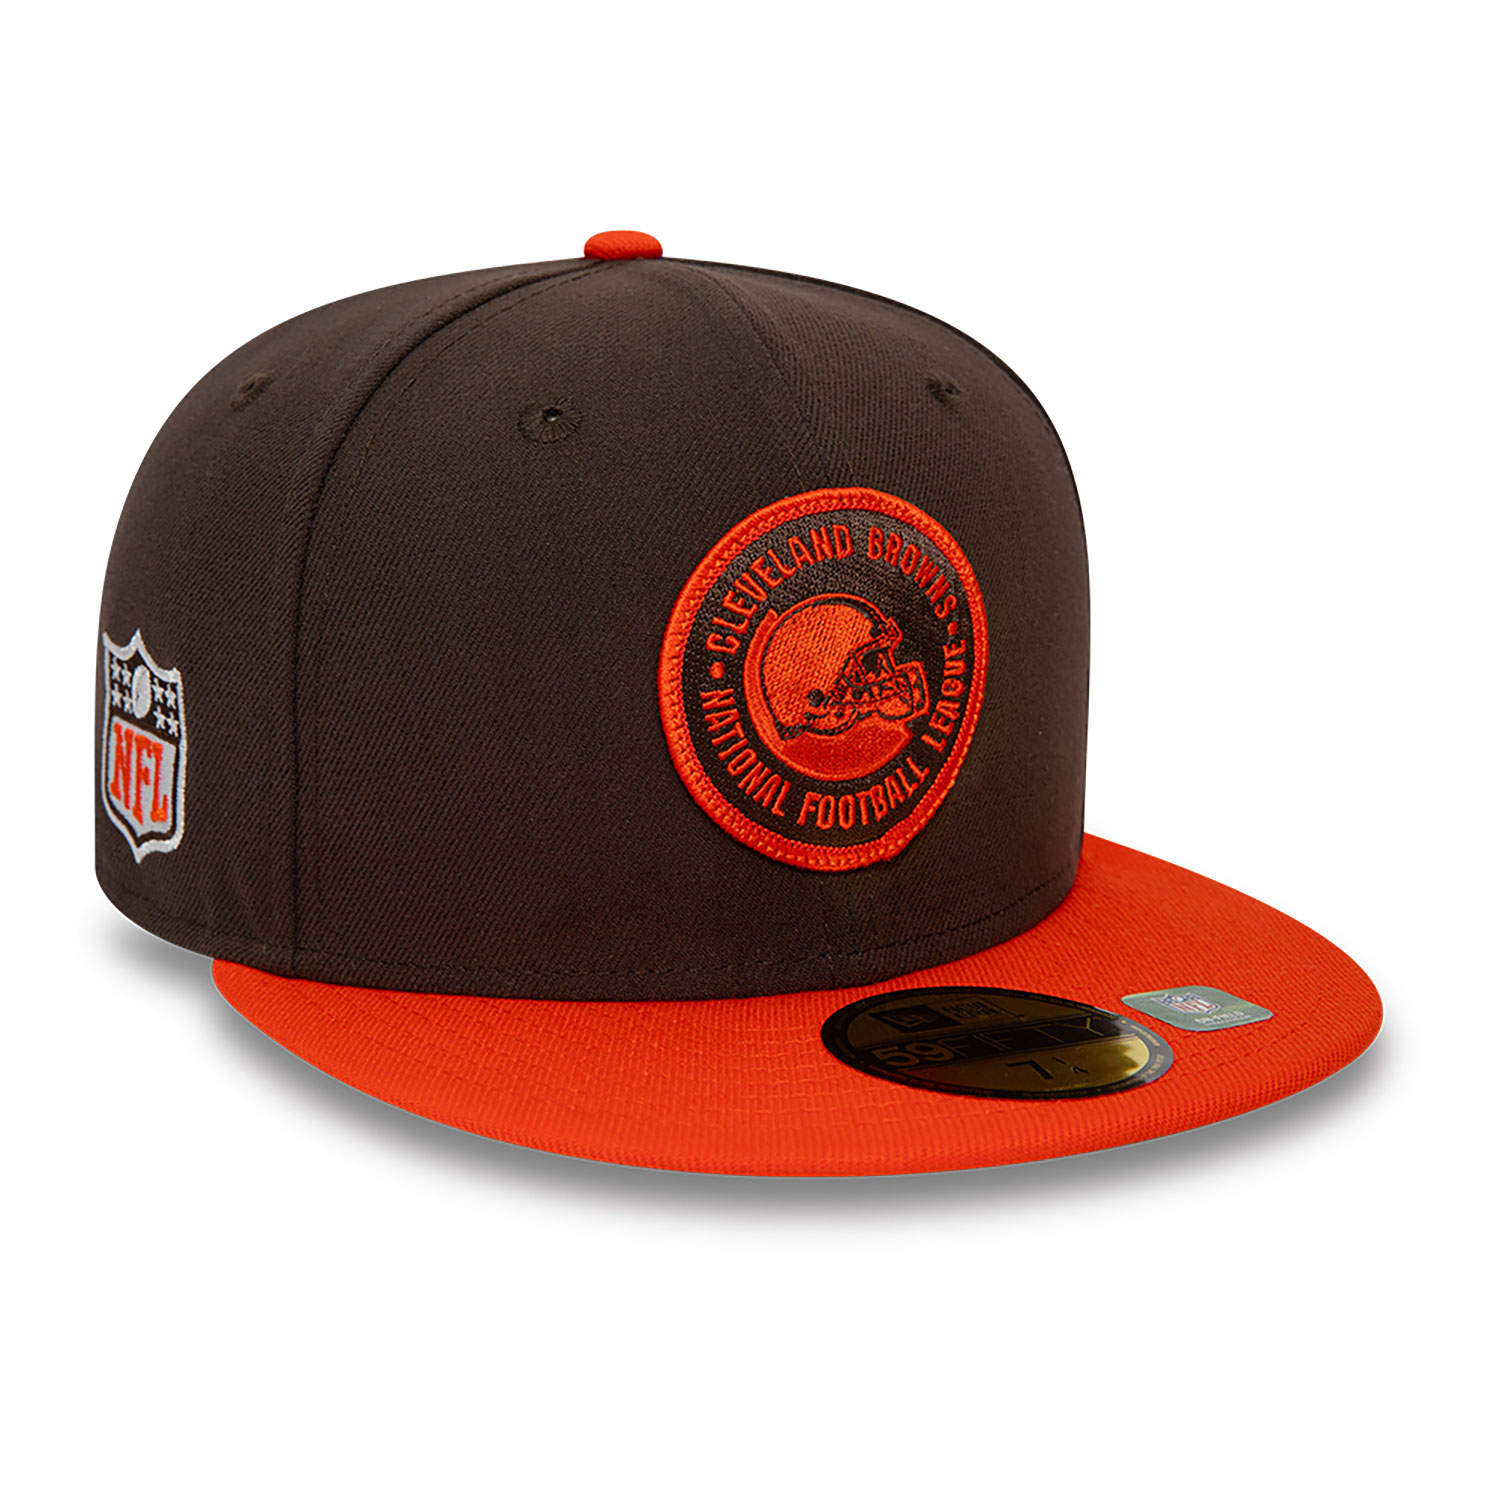 Brown Fitted Cap | Brown Fitted Hats | New Era Cap UK